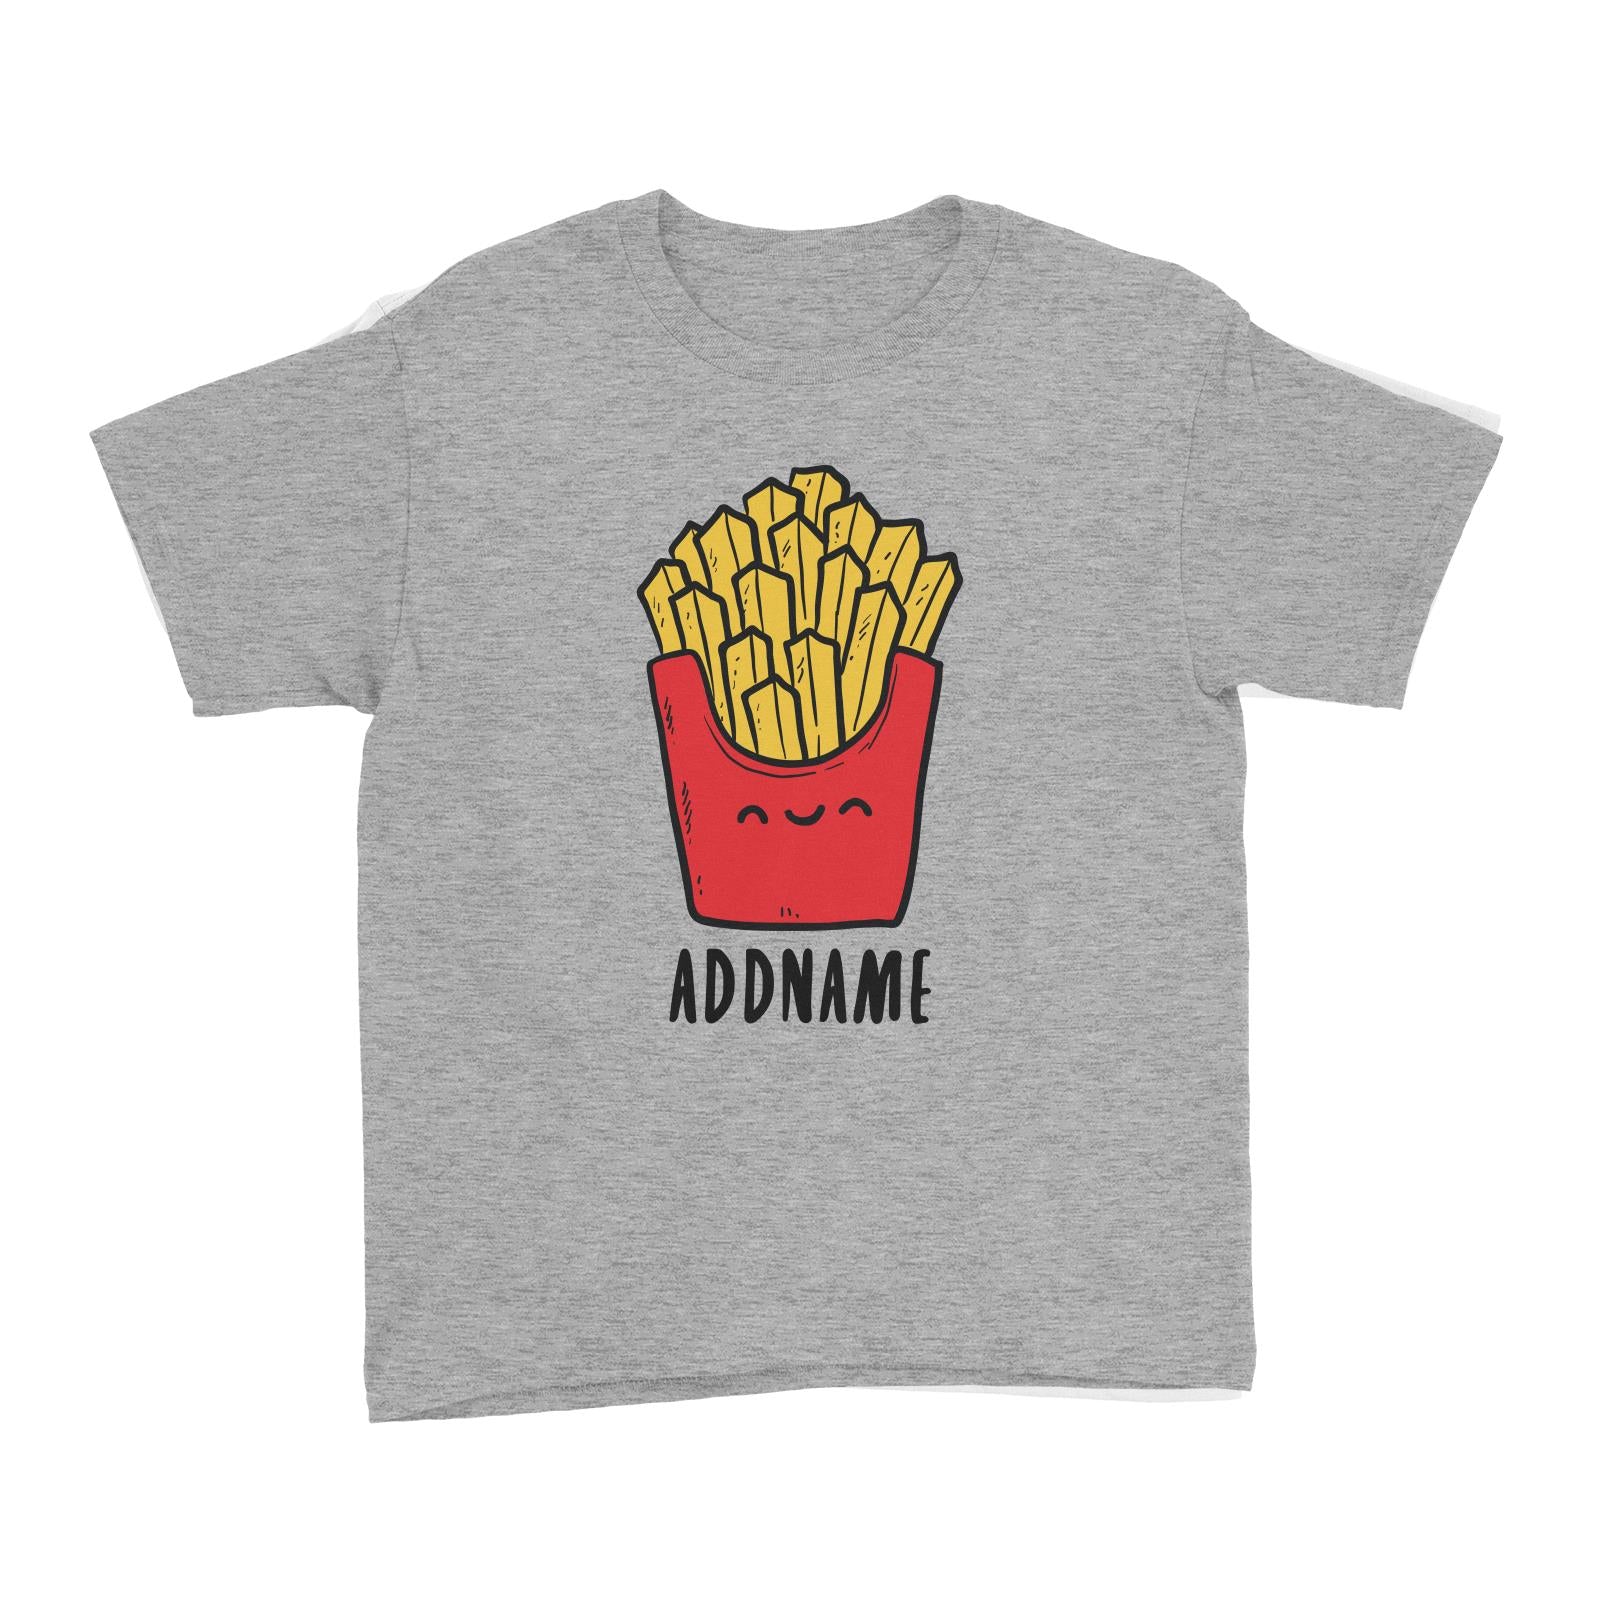 Fast Food Fries Addname Kid's T-Shirt  Matching Family Comic Cartoon Personalizable Designs